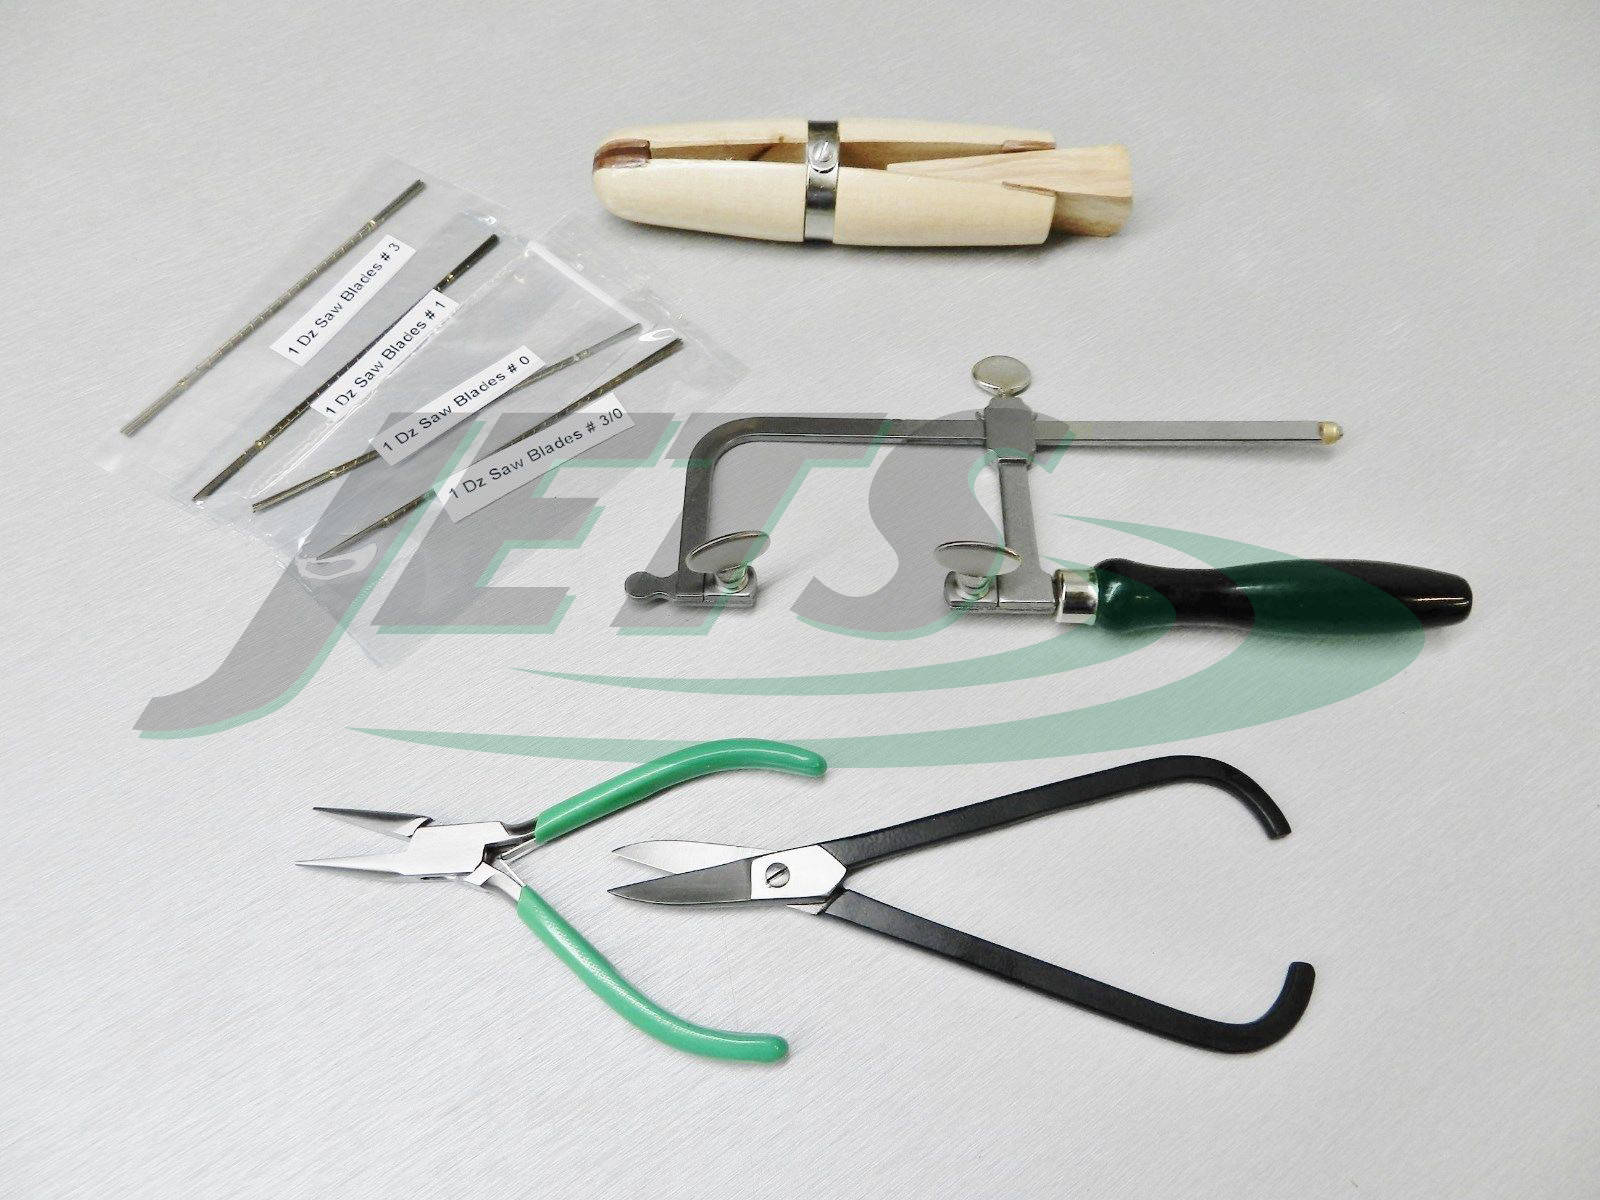 Wire Wrapping Tool Kit Jewelry Making Wire Bead Work Pliers & Hand